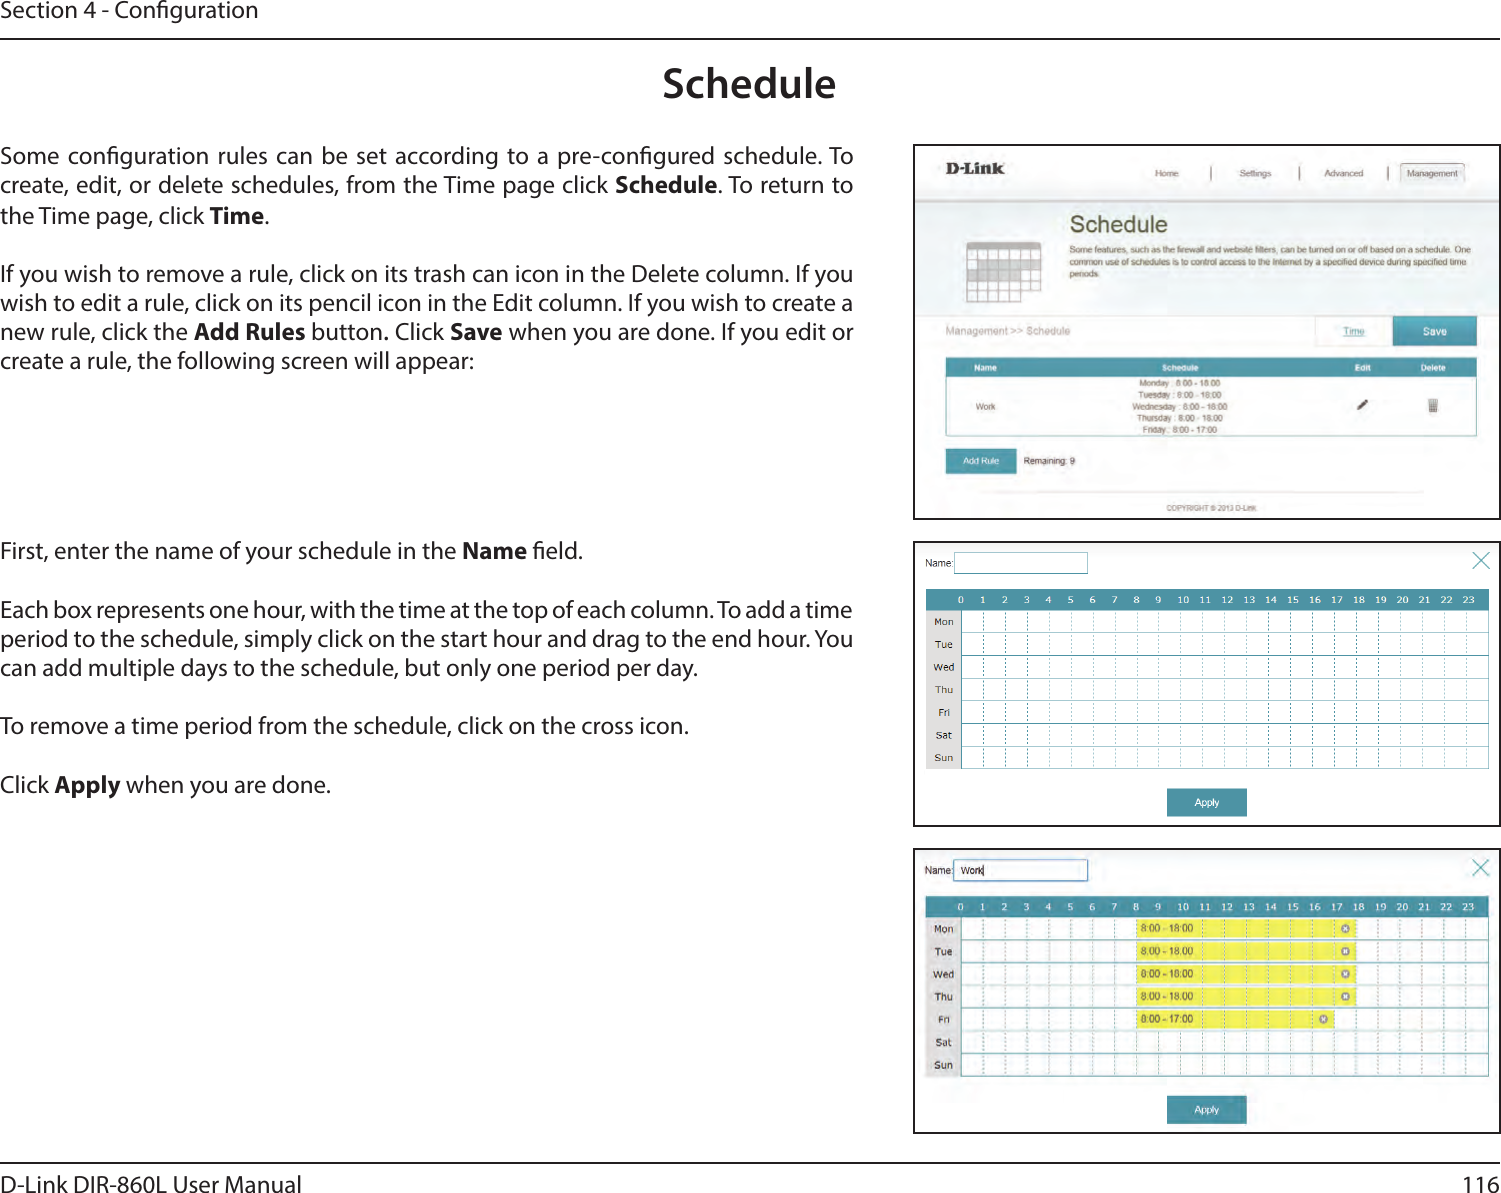 116D-Link DIR-860L User ManualSection 4 - CongurationScheduleSome conguration rules can be set according to a pre-congured schedule. To create, edit, or delete schedules, from the Time page click Schedule. To return to the Time page, click Time. If you wish to remove a rule, click on its trash can icon in the Delete column. If you wish to edit a rule, click on its pencil icon in the Edit column. If you wish to create a new rule, click the Add Rules button. Click Save when you are done. If you edit or create a rule, the following screen will appear:First, enter the name of your schedule in the Name eld.Each box represents one hour, with the time at the top of each column. To add a time period to the schedule, simply click on the start hour and drag to the end hour. You can add multiple days to the schedule, but only one period per day.To remove a time period from the schedule, click on the cross icon.Click Apply when you are done.